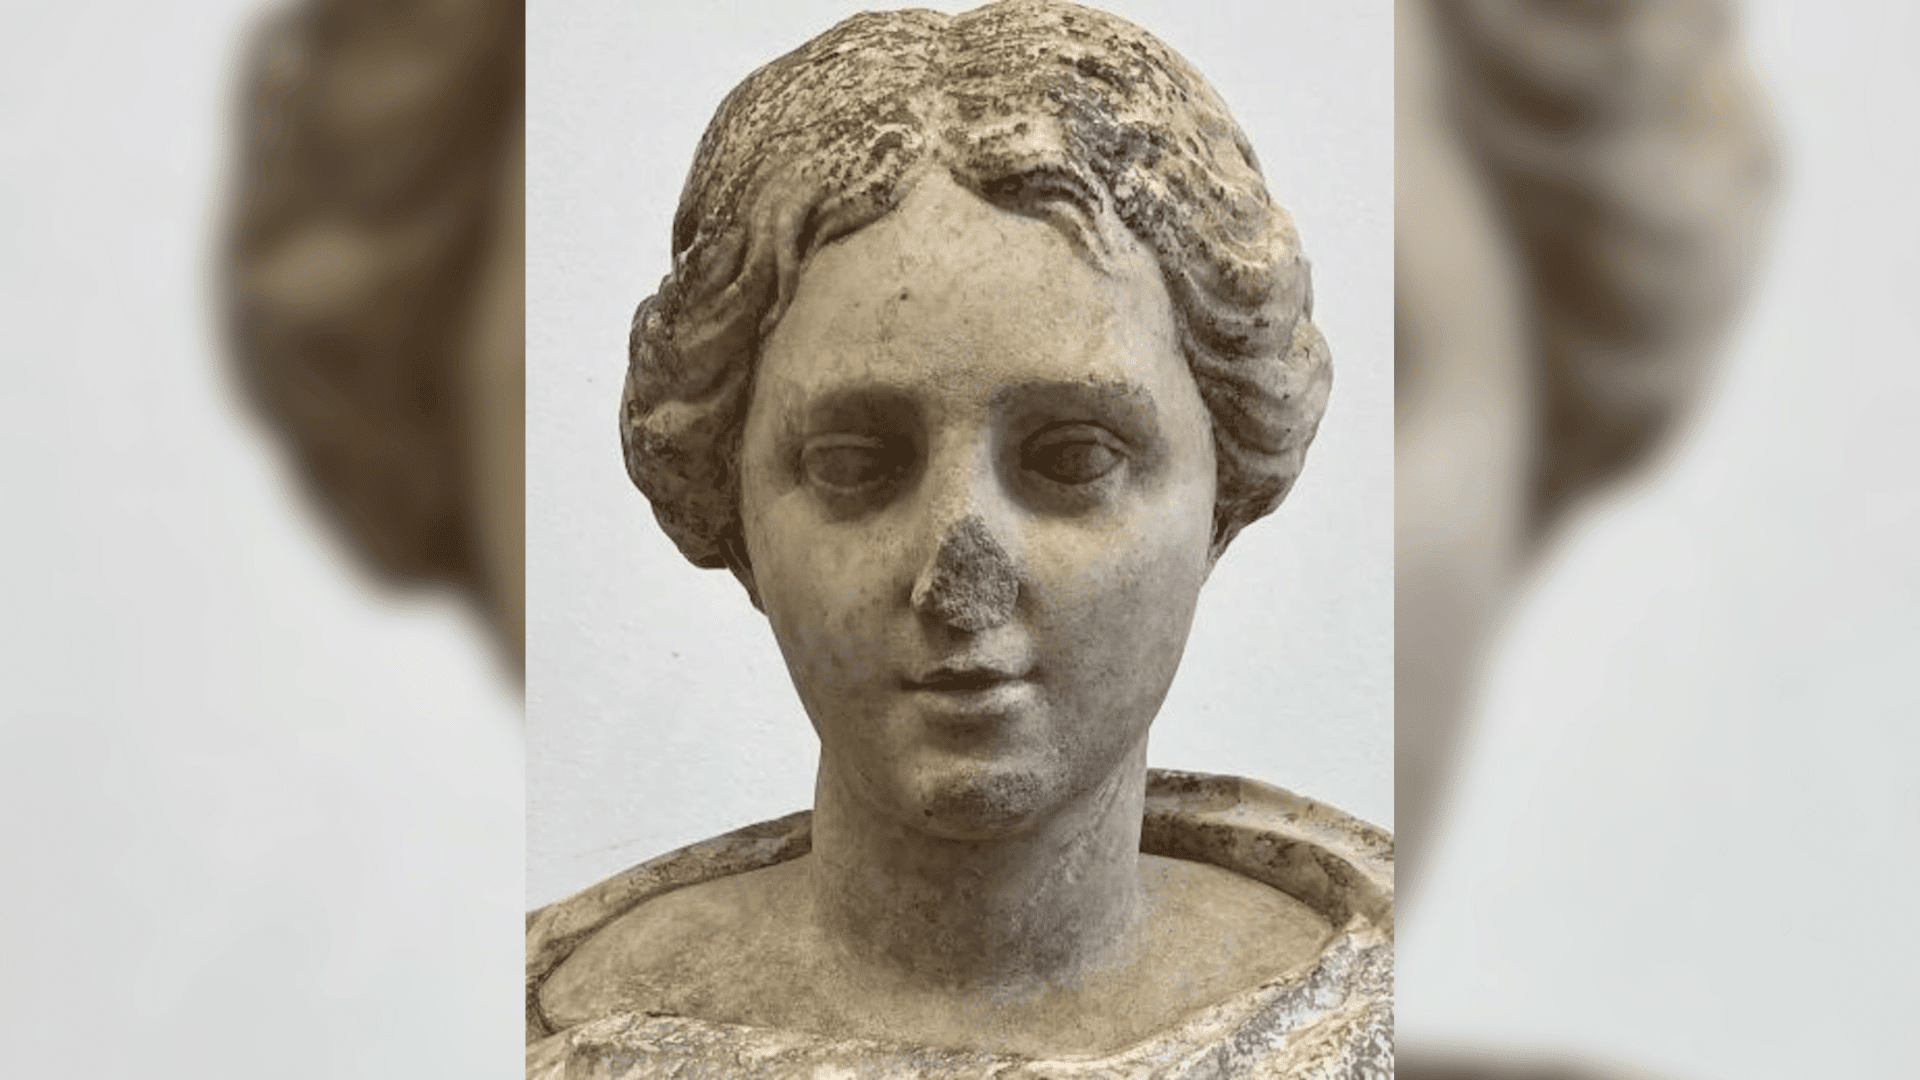 A mysterious 1,800-year-old Roman statue has been discovered by a construction worker while he was digging up a parking lot in the United Kingdom. Burghley House